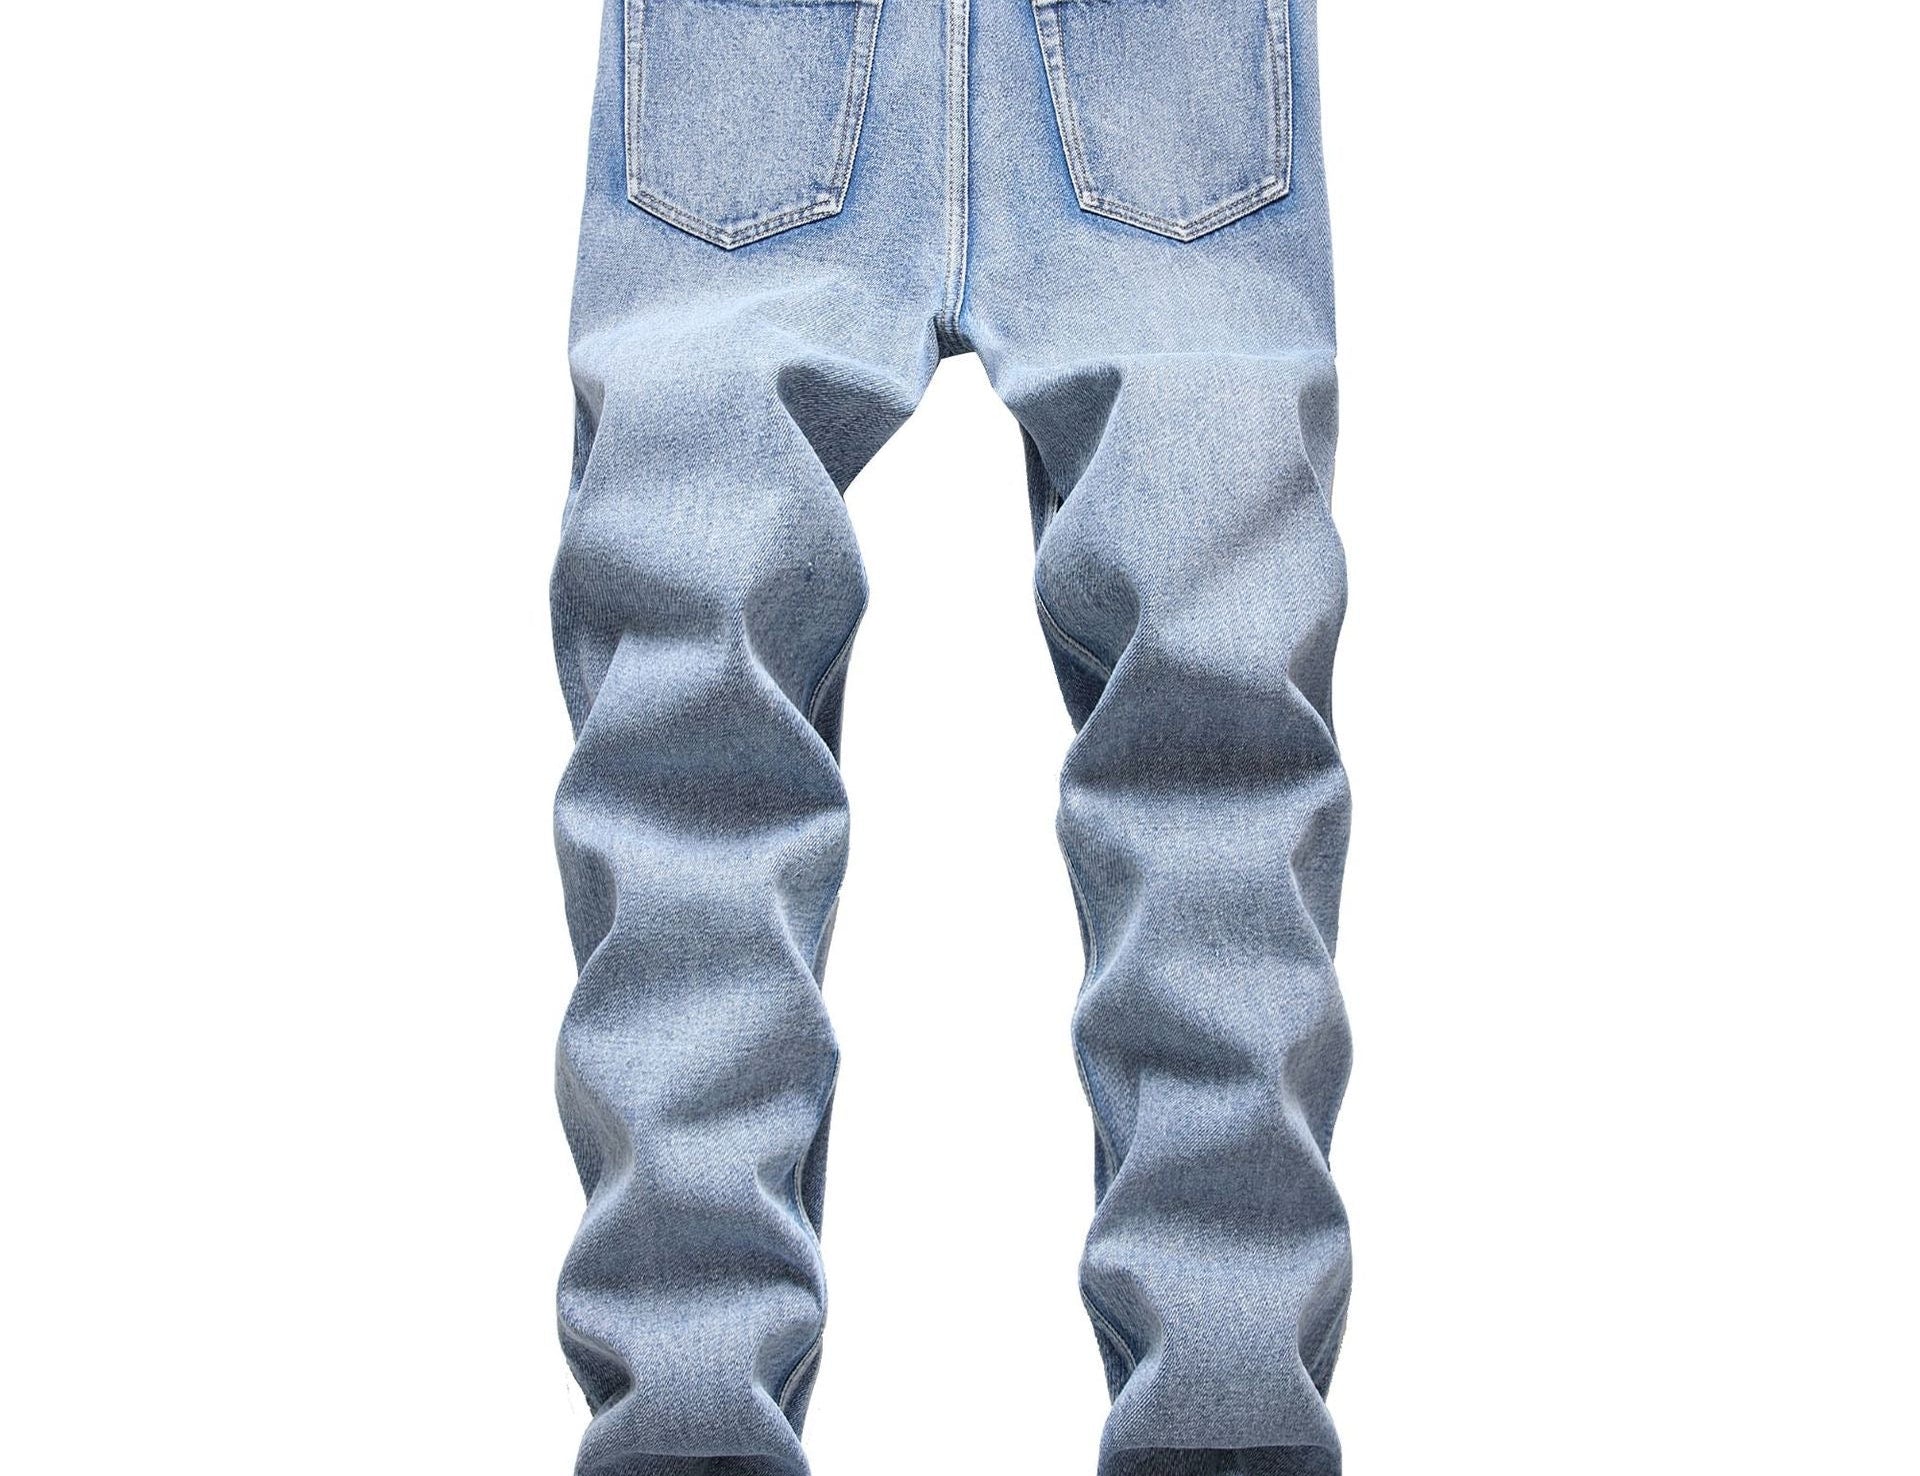 XHHU - Denim Jeans for Men - Sarman Fashion - Wholesale Clothing Fashion Brand for Men from Canada